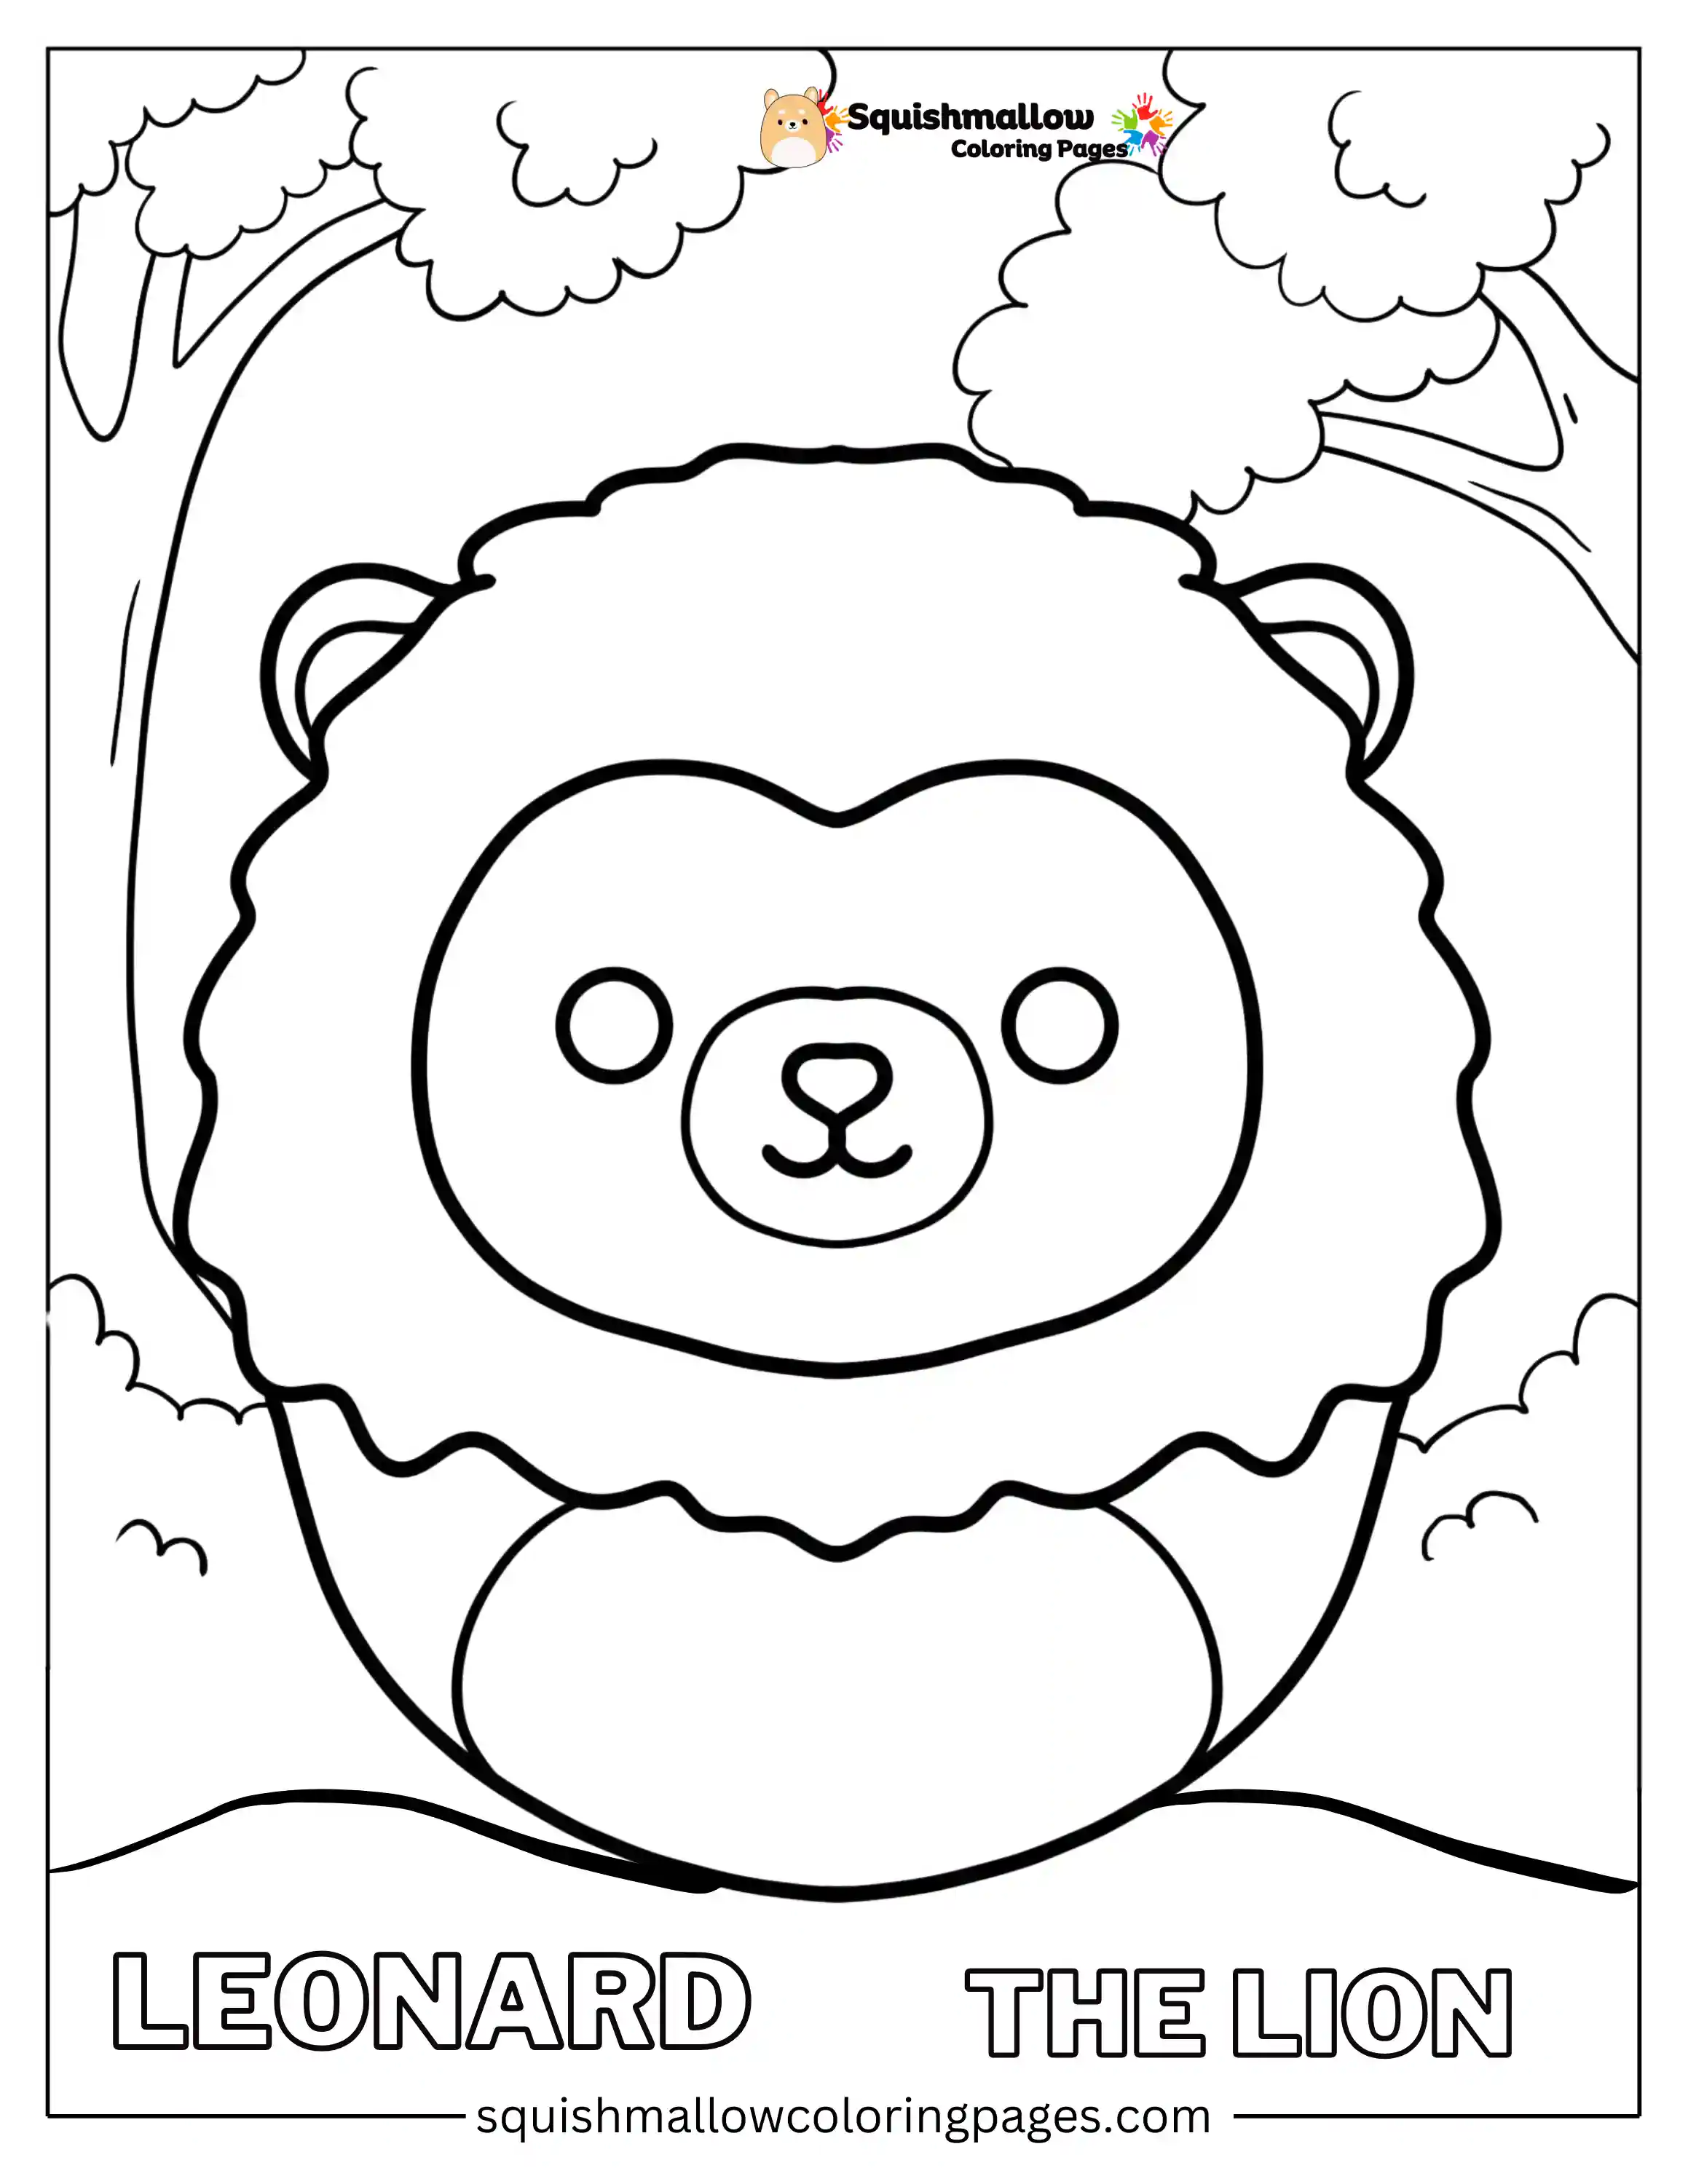 110+ Squishmallow Coloring Pages | Free Printable PDF